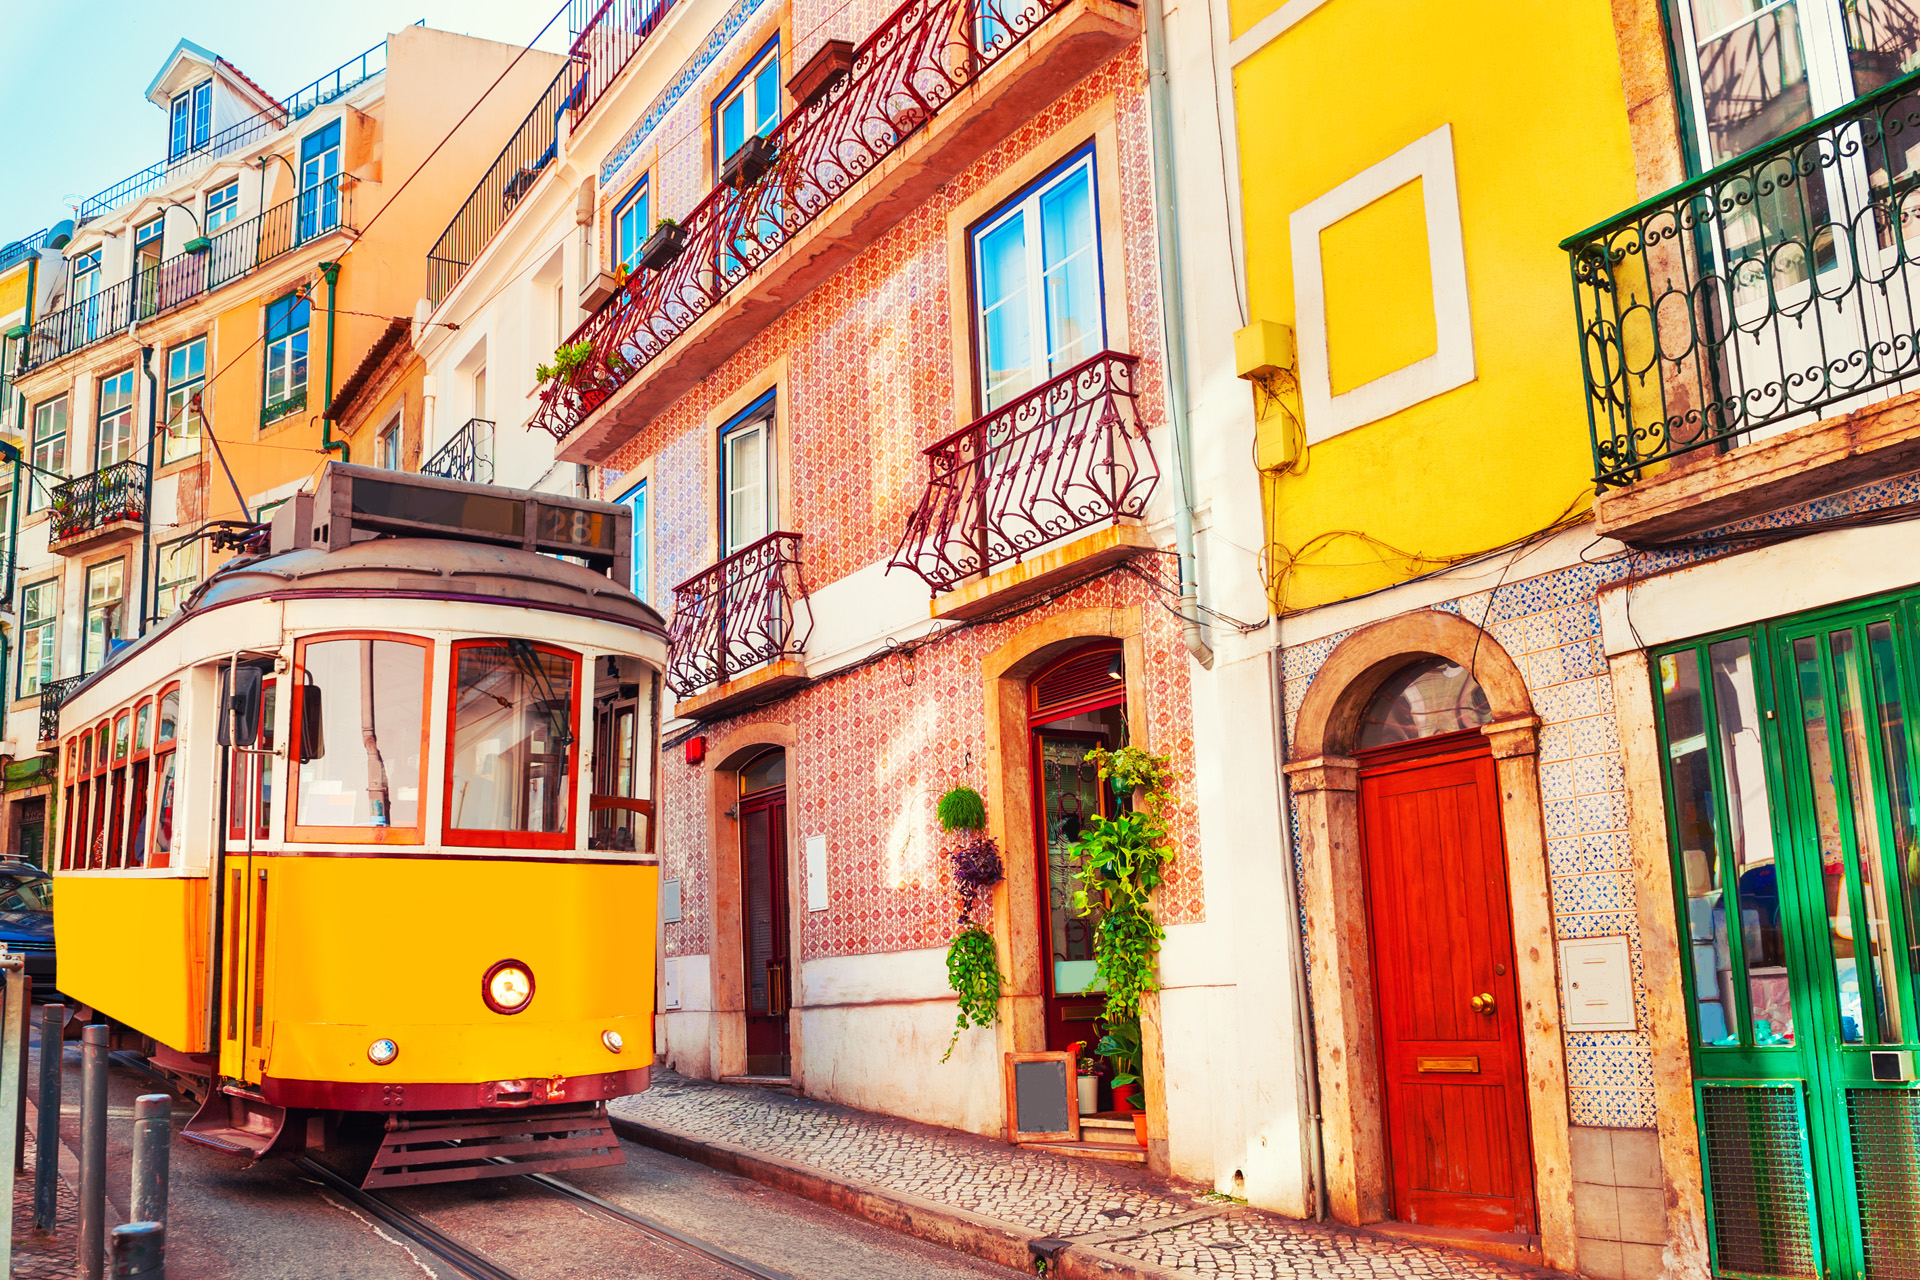 Yellow vintage tram on the street in Lisbon, Portugal